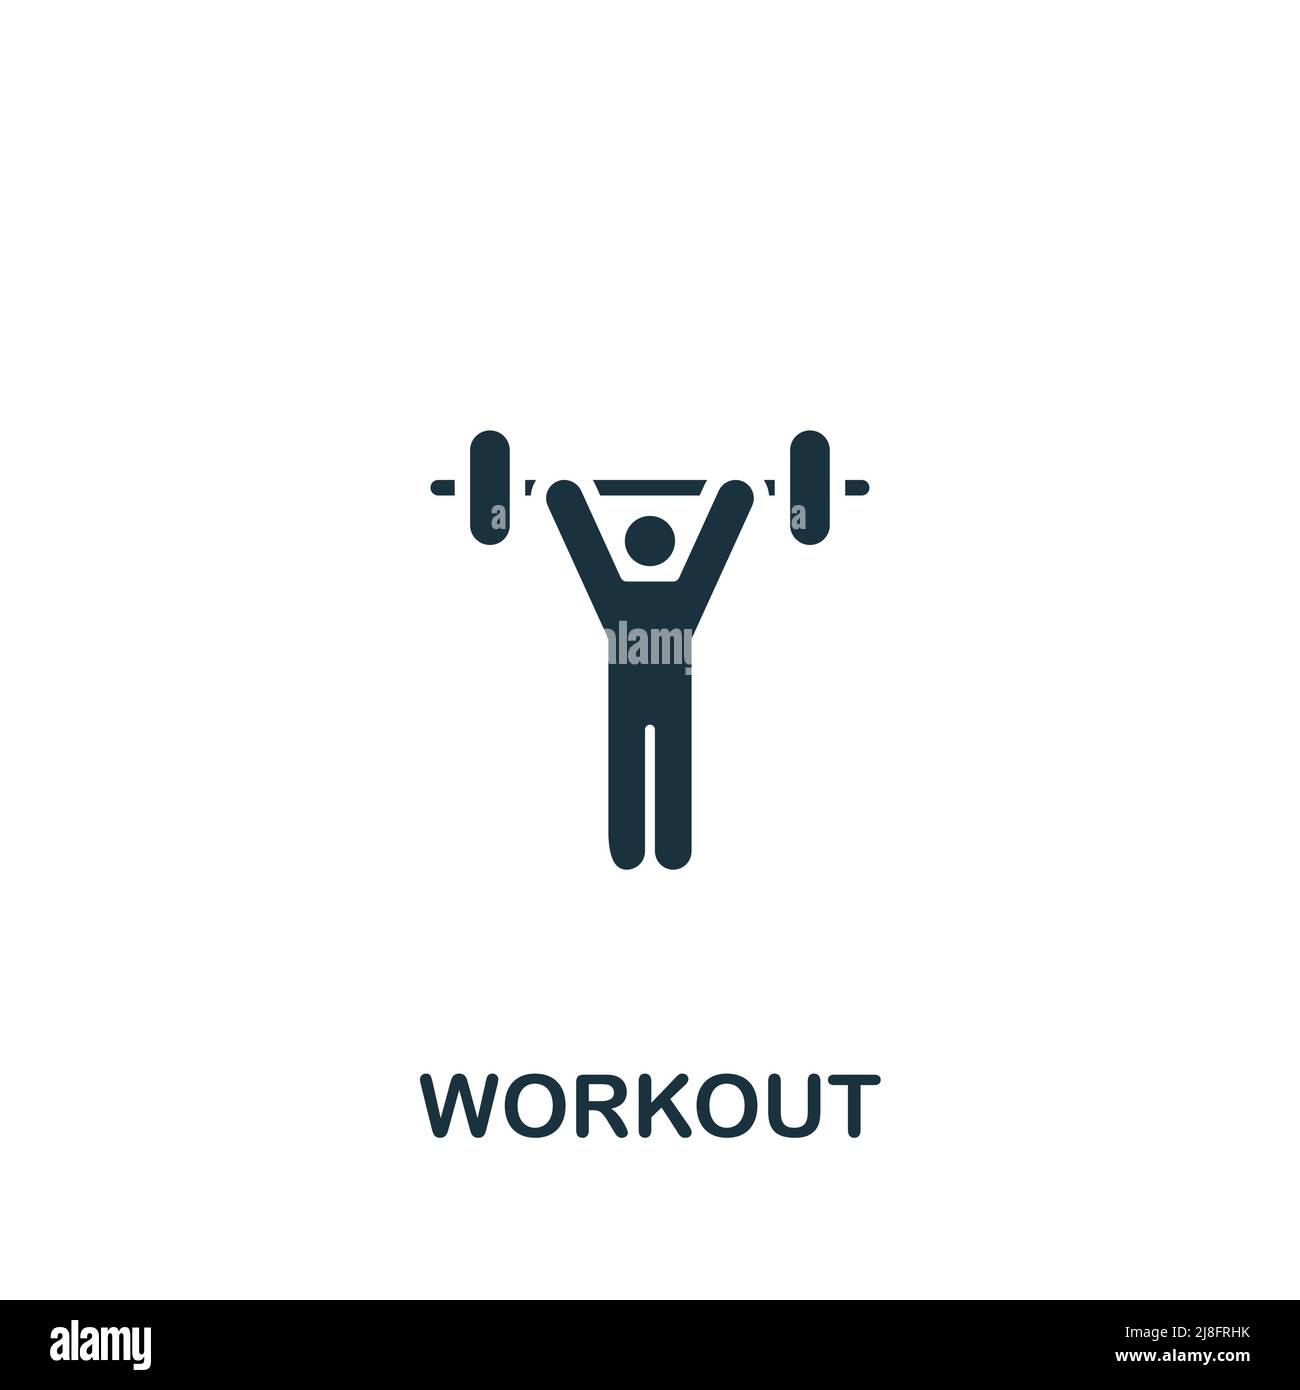 https://c8.alamy.com/comp/2J8FRHK/workout-icon-monochrome-simple-fitness-icon-for-templates-web-design-and-infographics-2J8FRHK.jpg